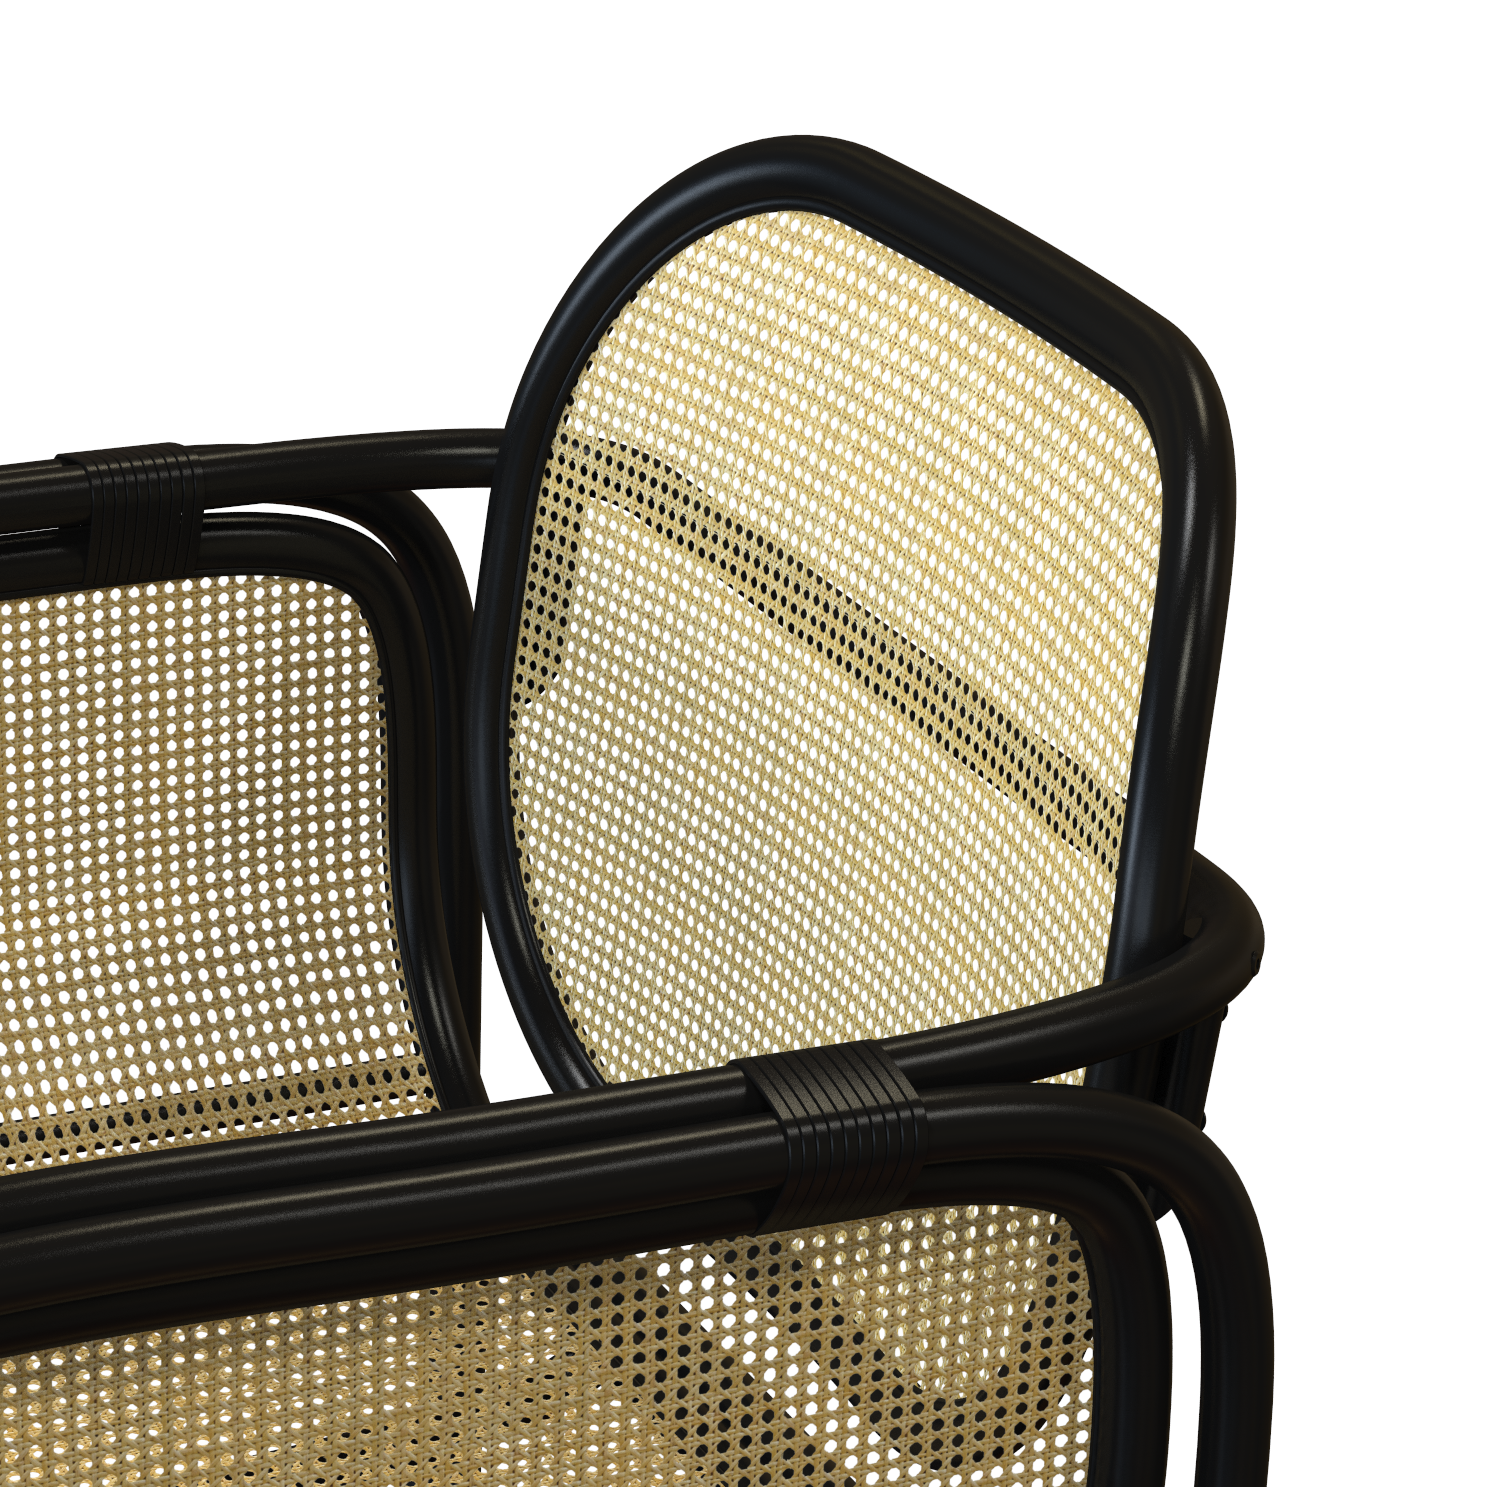 Polyrattan Lounge Luxus Check Out My Behance Project “marte Lounge Chair” S